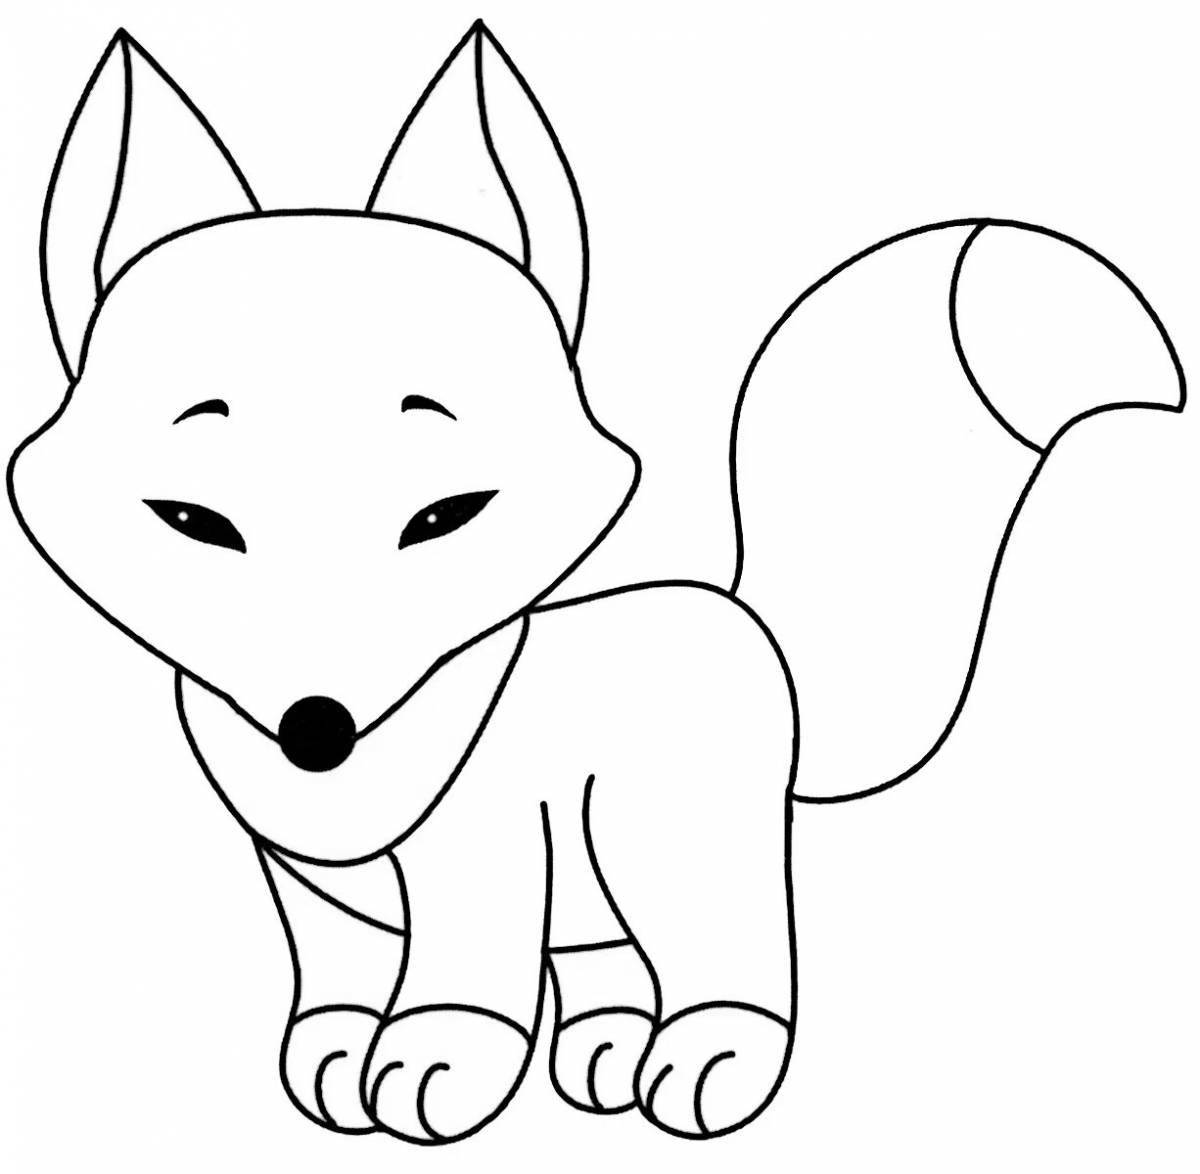 Coloring page chubby little fox